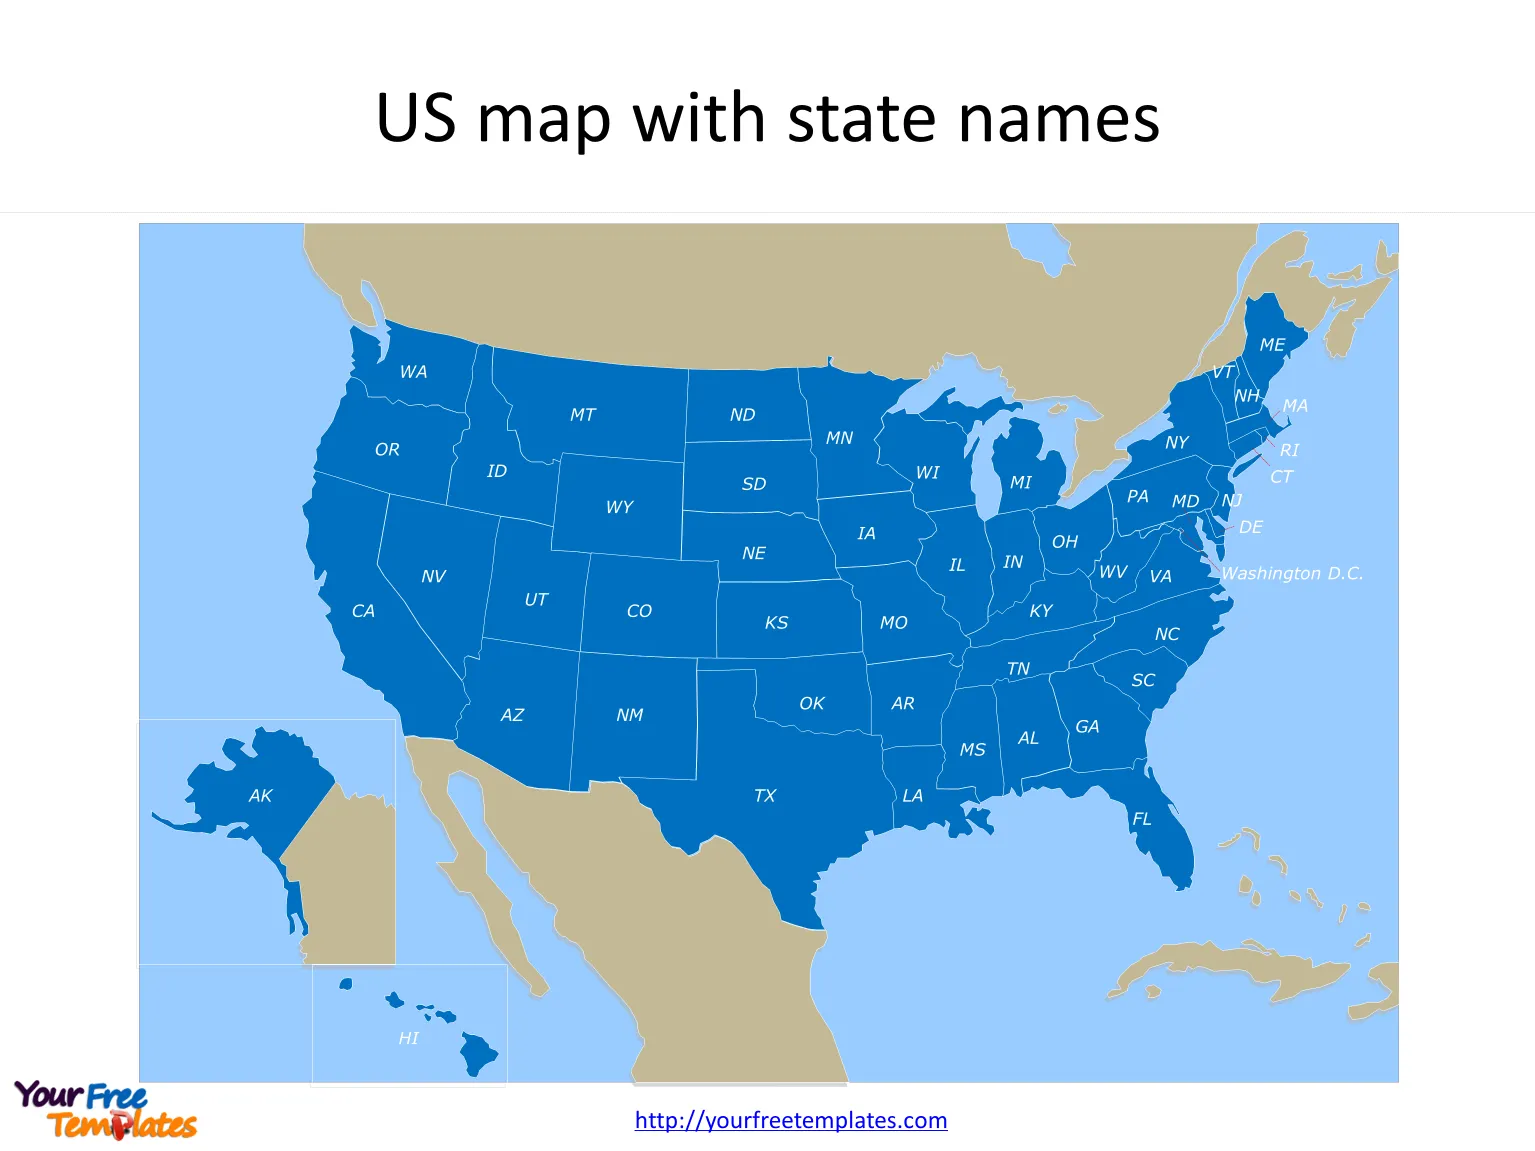 US map with state names of two-letter abbreviation